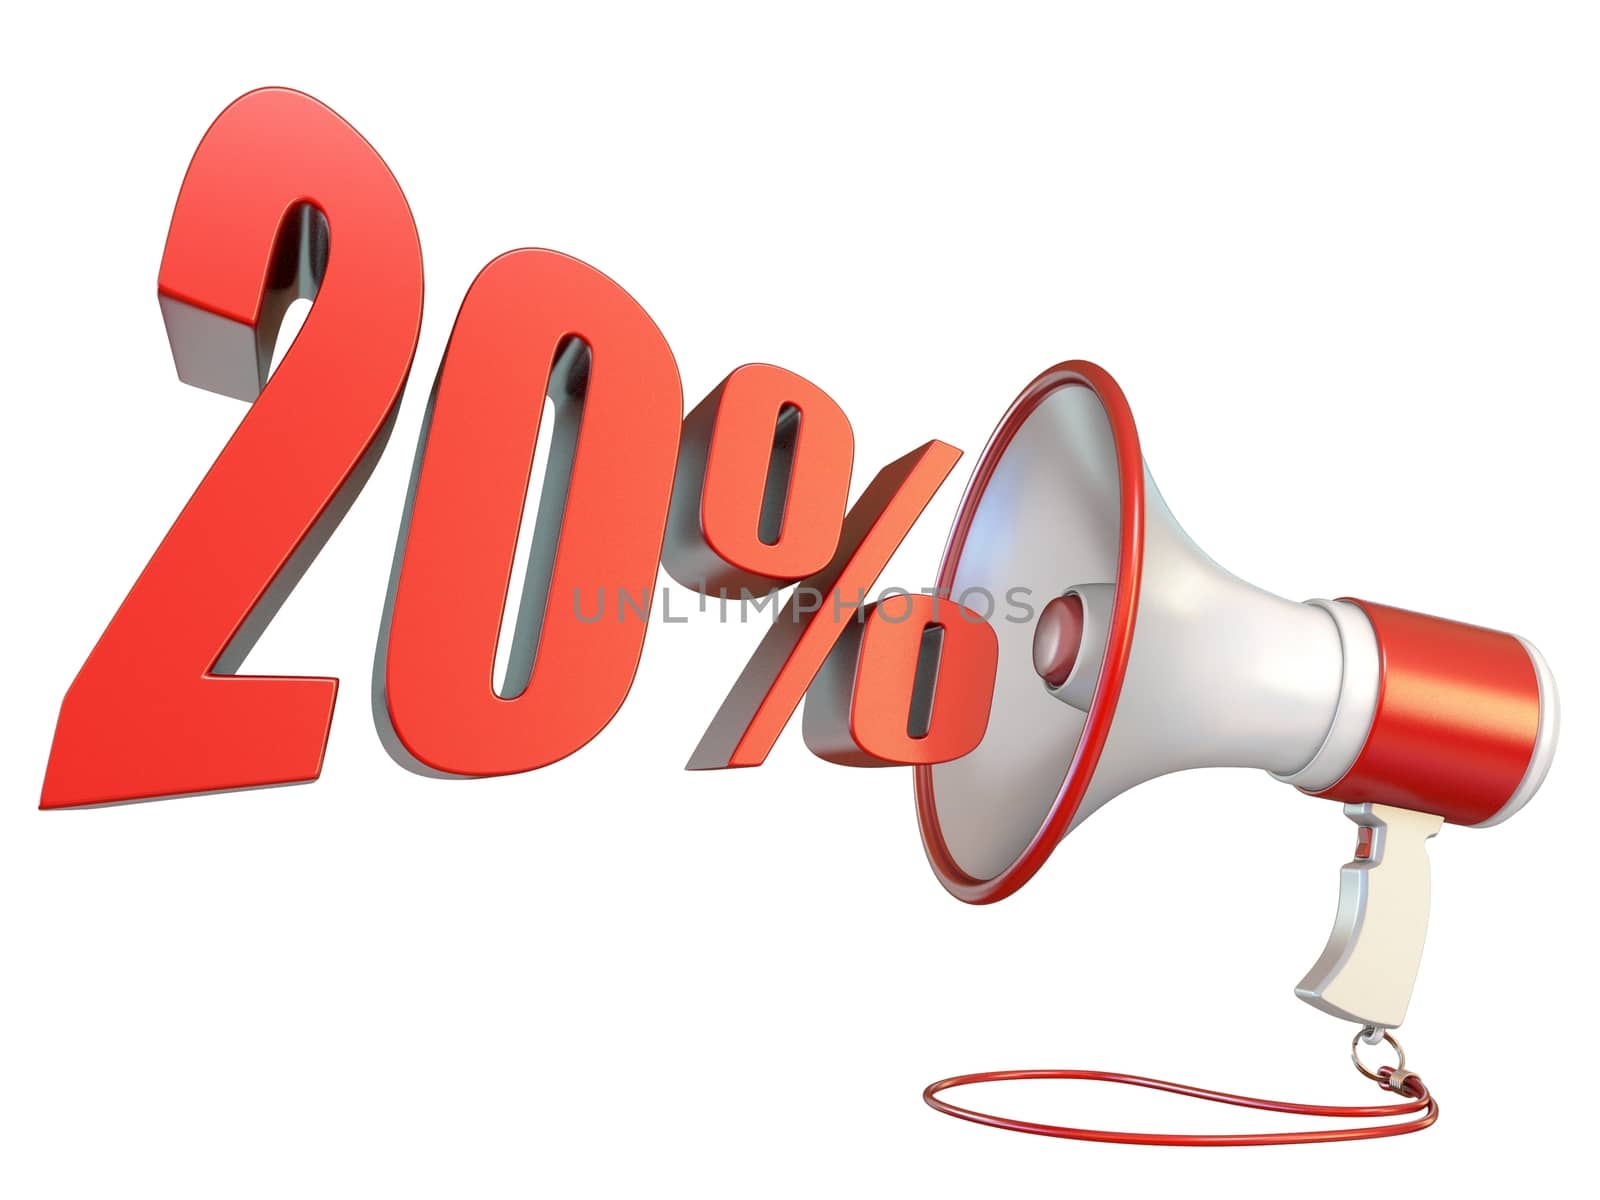 20 percent sign and megaphone 3D rendering illustration isolated on white background